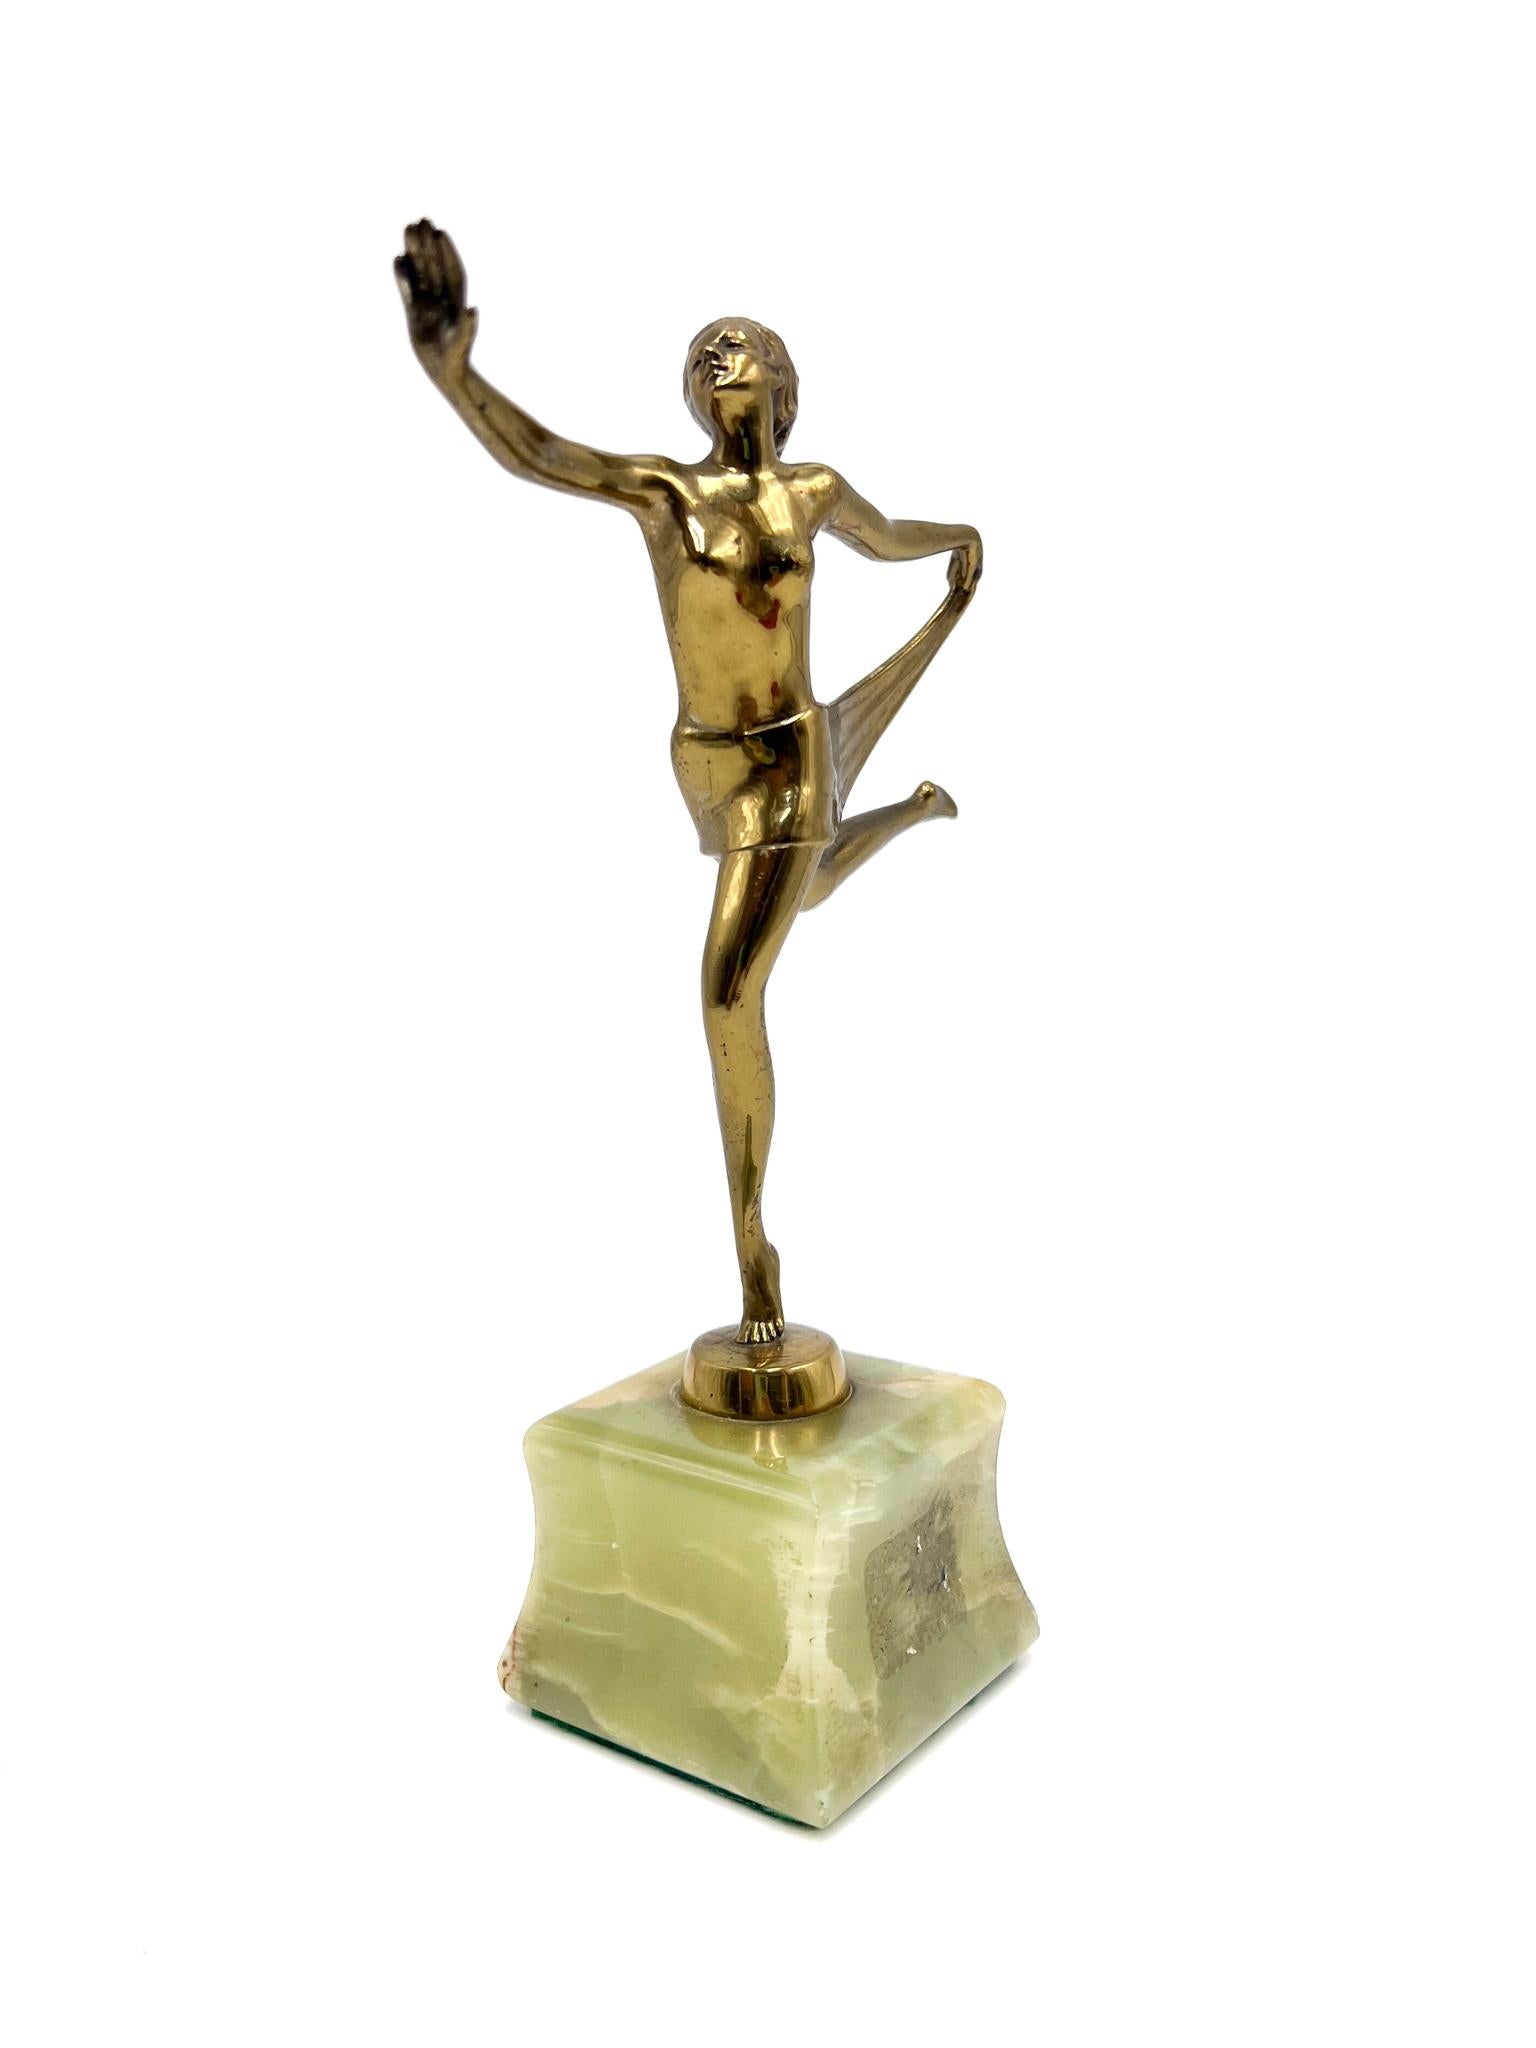 Gilded bronze sculpture and marble base depicting a dancer, made by the sculptor Josef Lorenzl in the early 1900s

Ø cm 14 Ø cm 5 h cm 20

Josef Lorenzl (Austrian 1892 - 1950) was one of the most talented sculptor and ceramist of the designs of